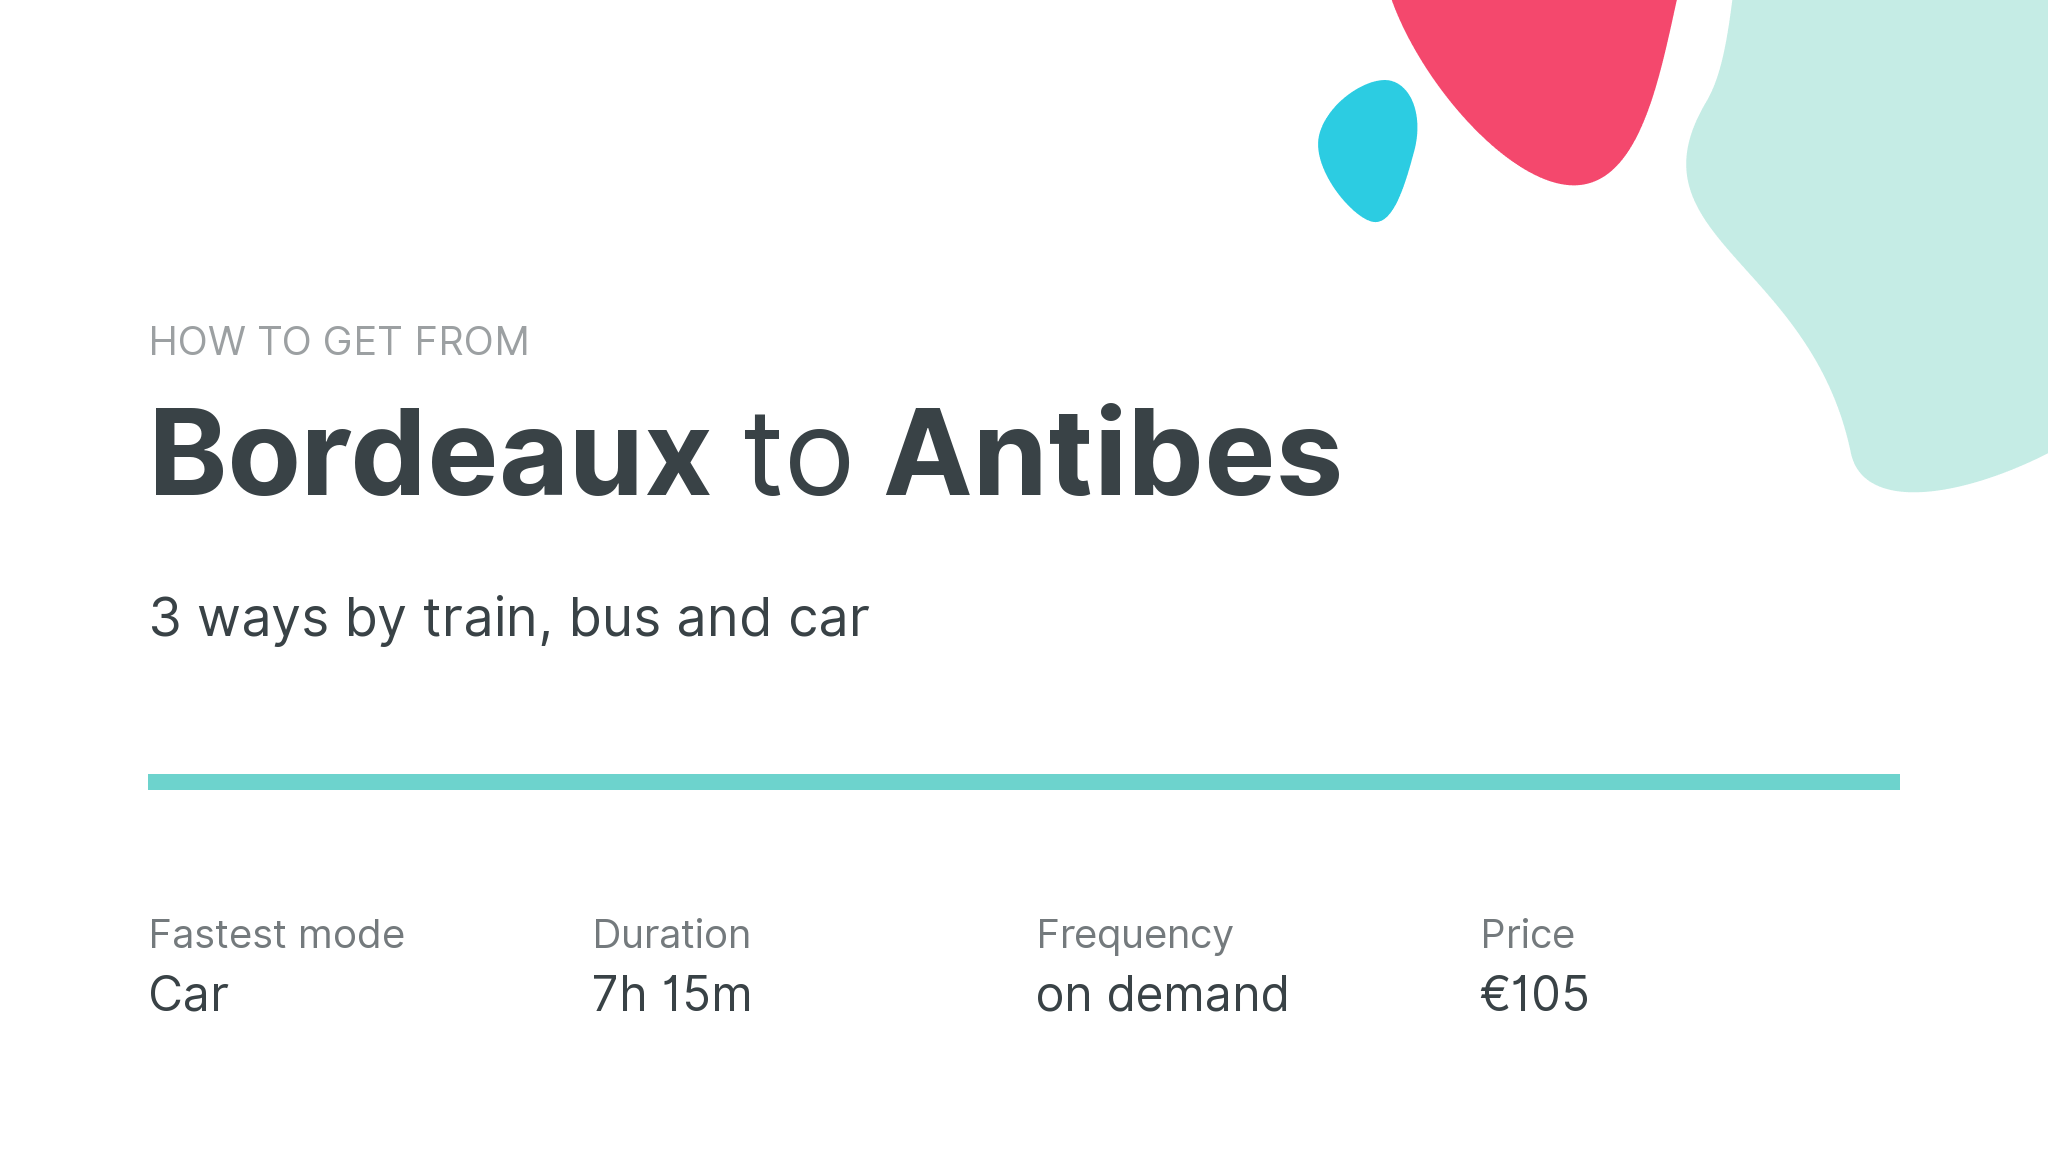 How do I get from Bordeaux to Antibes